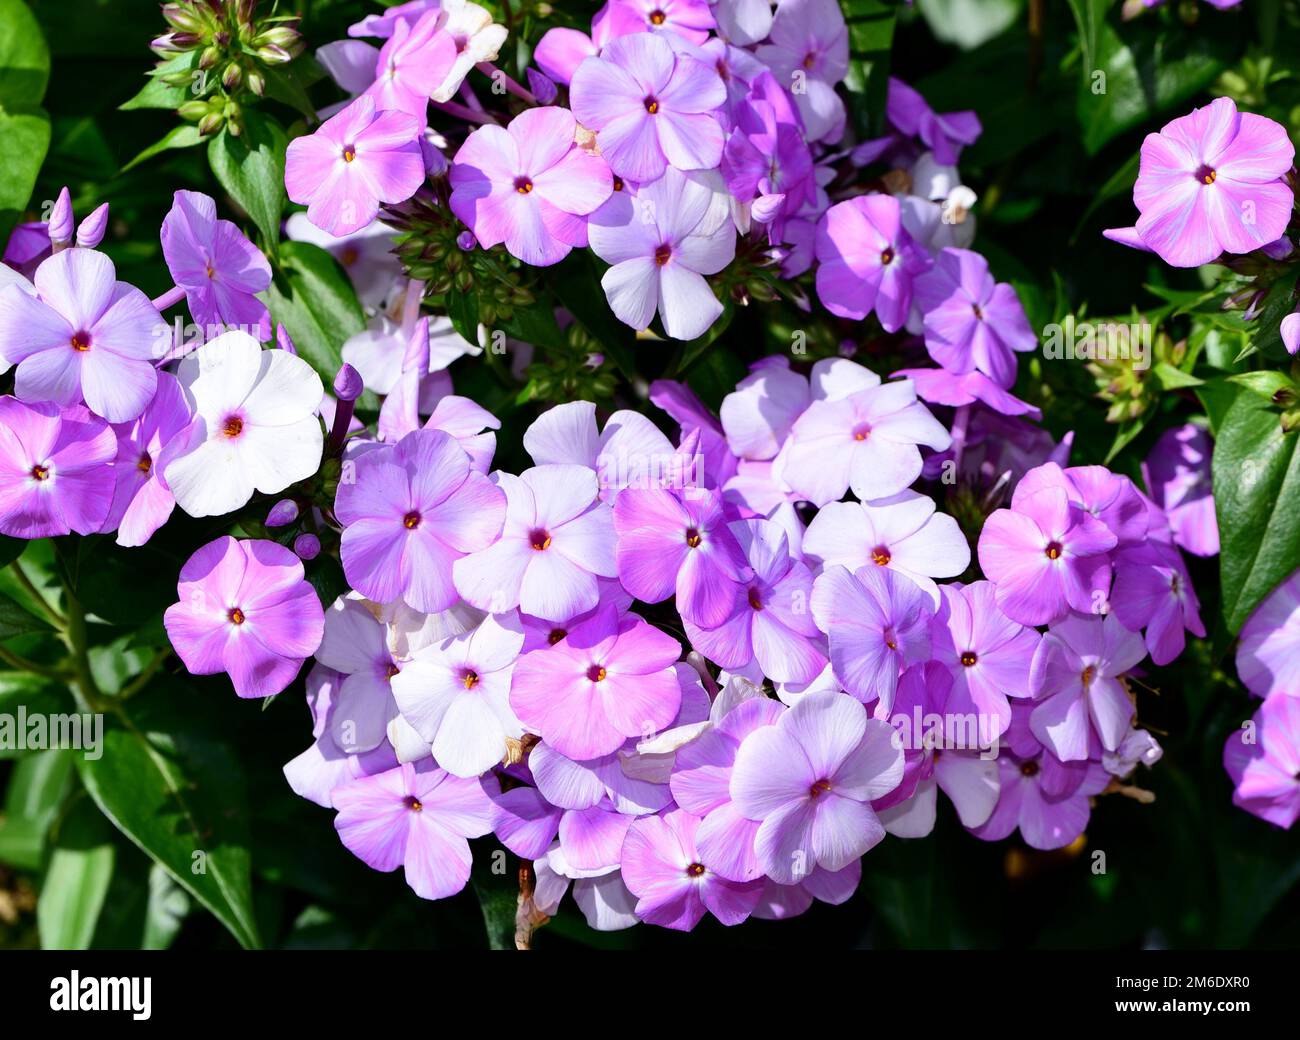 A top view of a pink Phlox paniculata flower plant Stock Photo